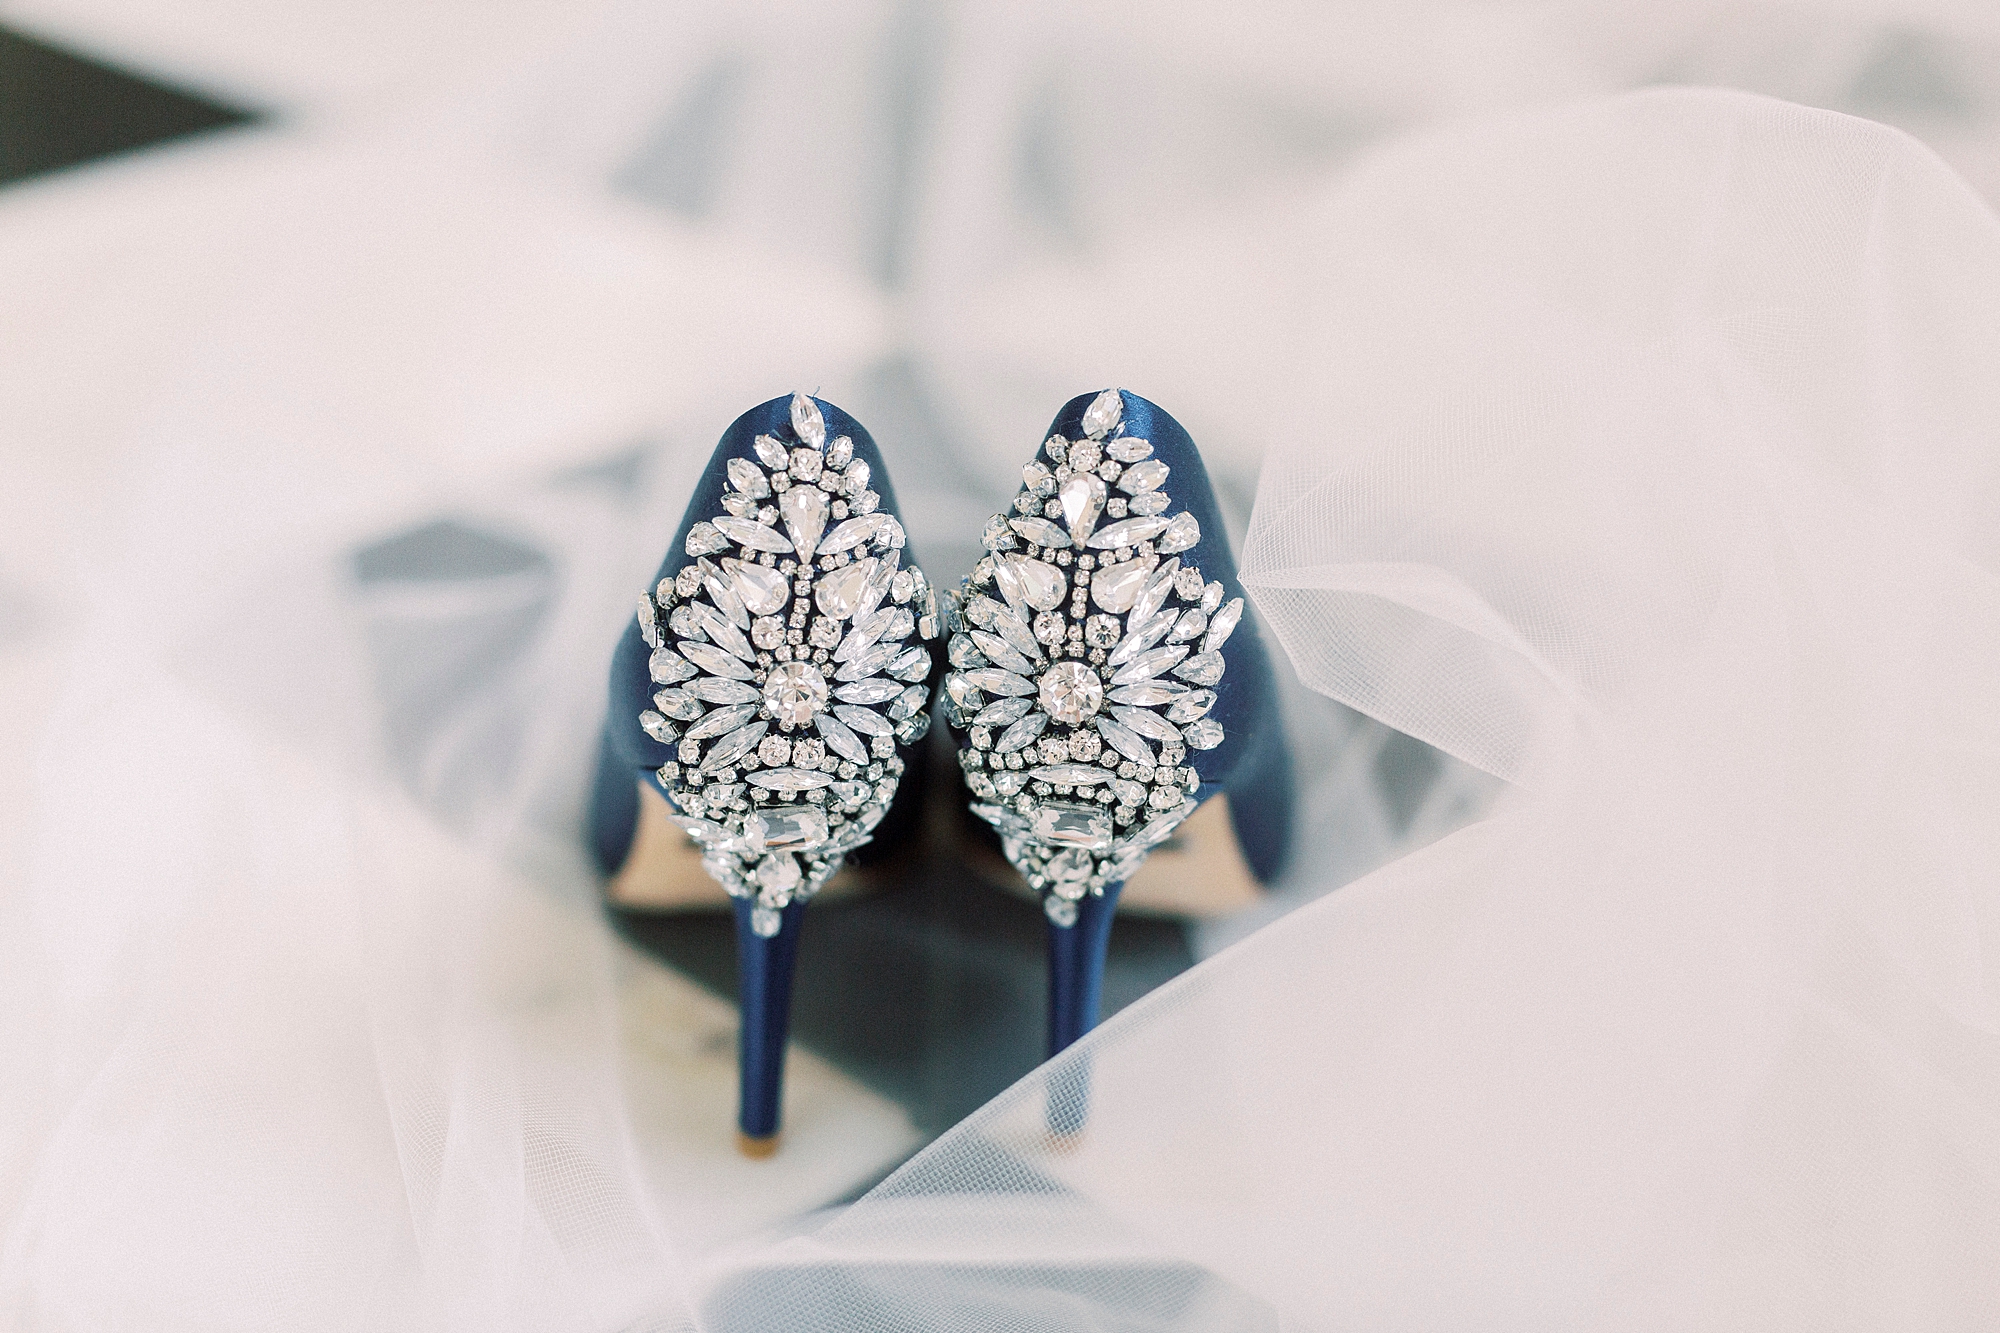 jeweled heel of blue shoes for bride